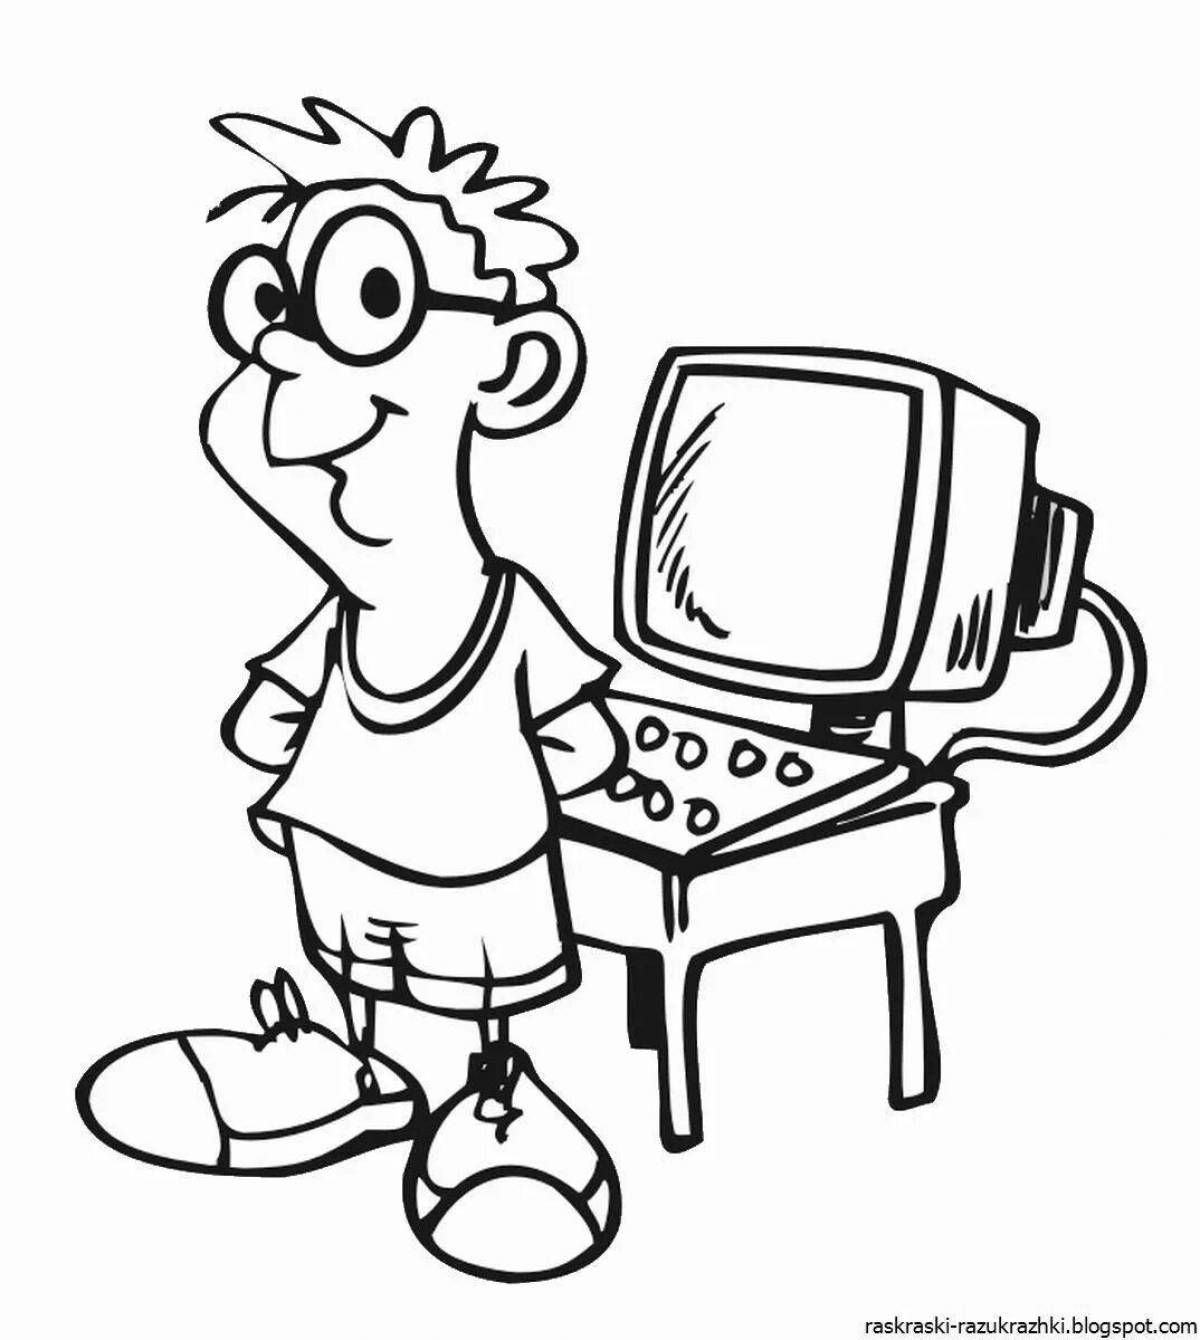 An interesting programmer coloring book for kids